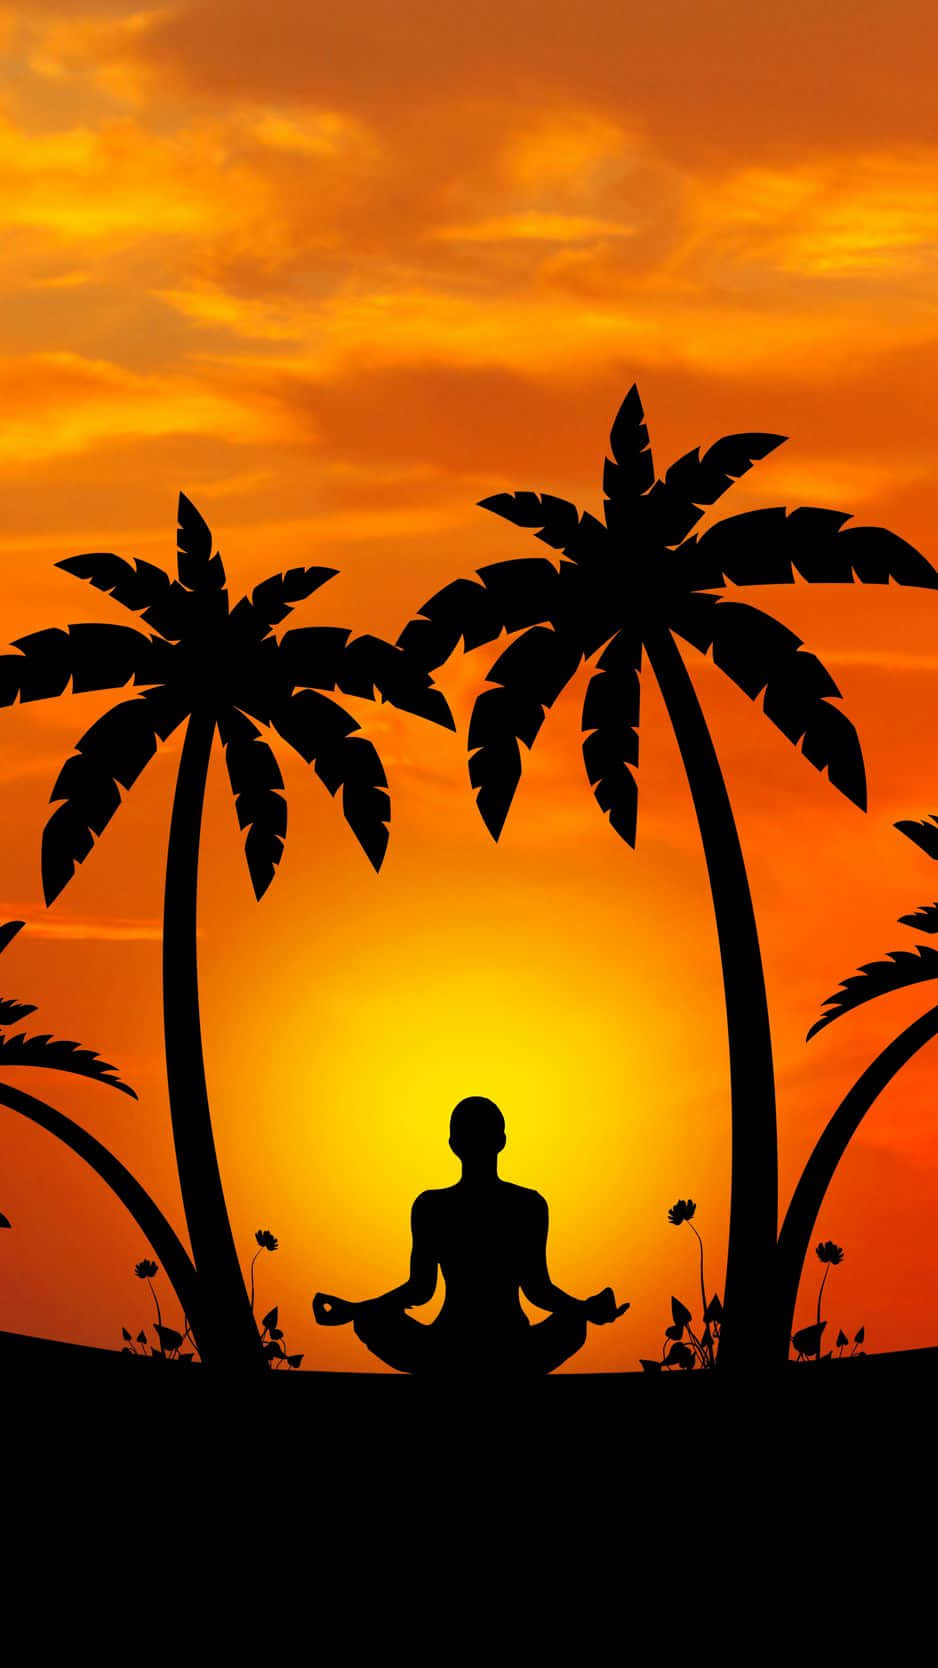 A Man In A Lotus Pose In Front Of Palm Trees